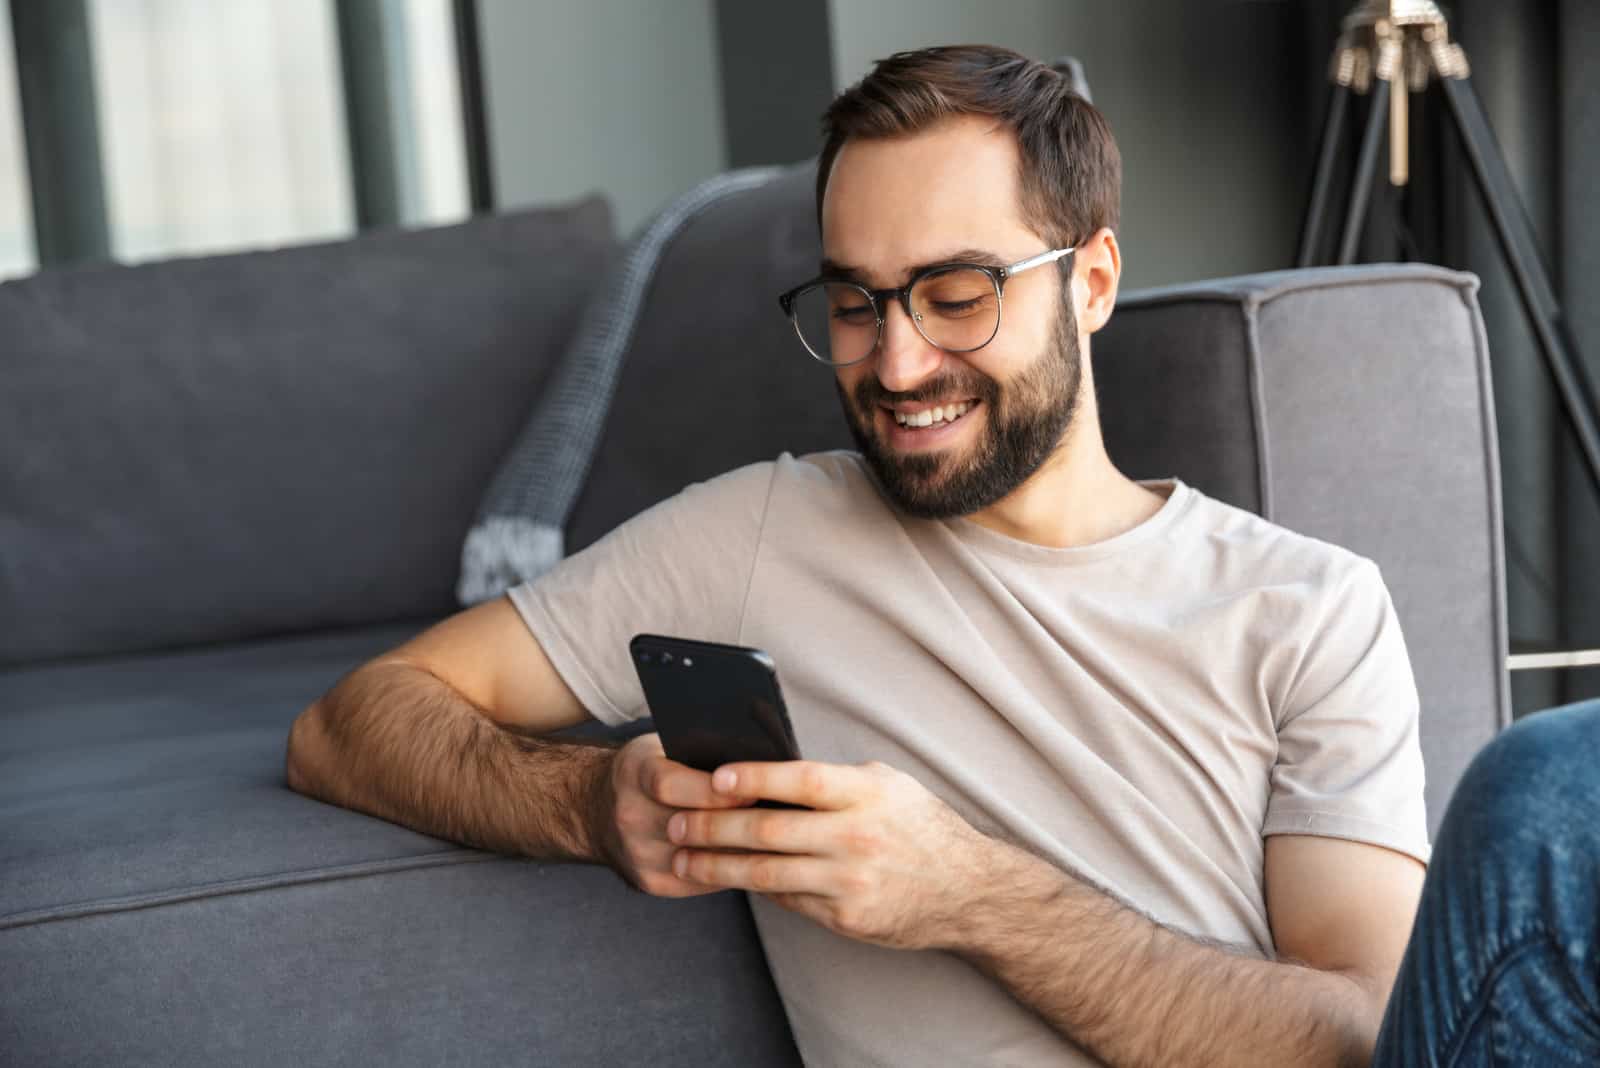 a smiling man sits on the floor and buttons on the phone